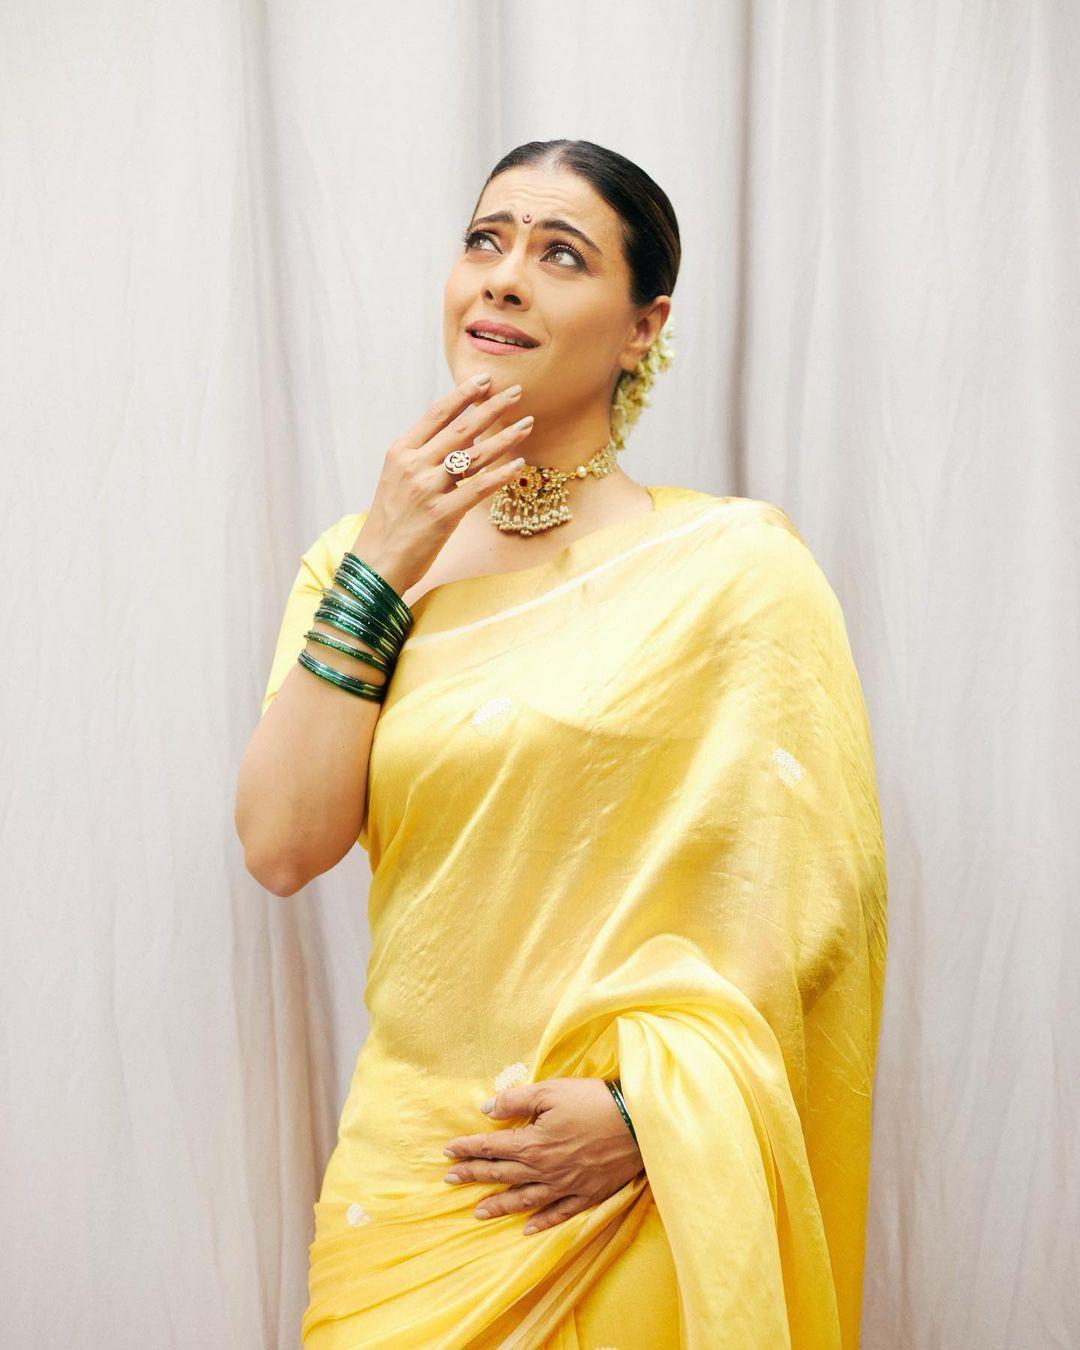 Kajol tied her hair up in a bun and decorated it with a gajra. To add to her look, she accessorized with green bangles and a choker necklace